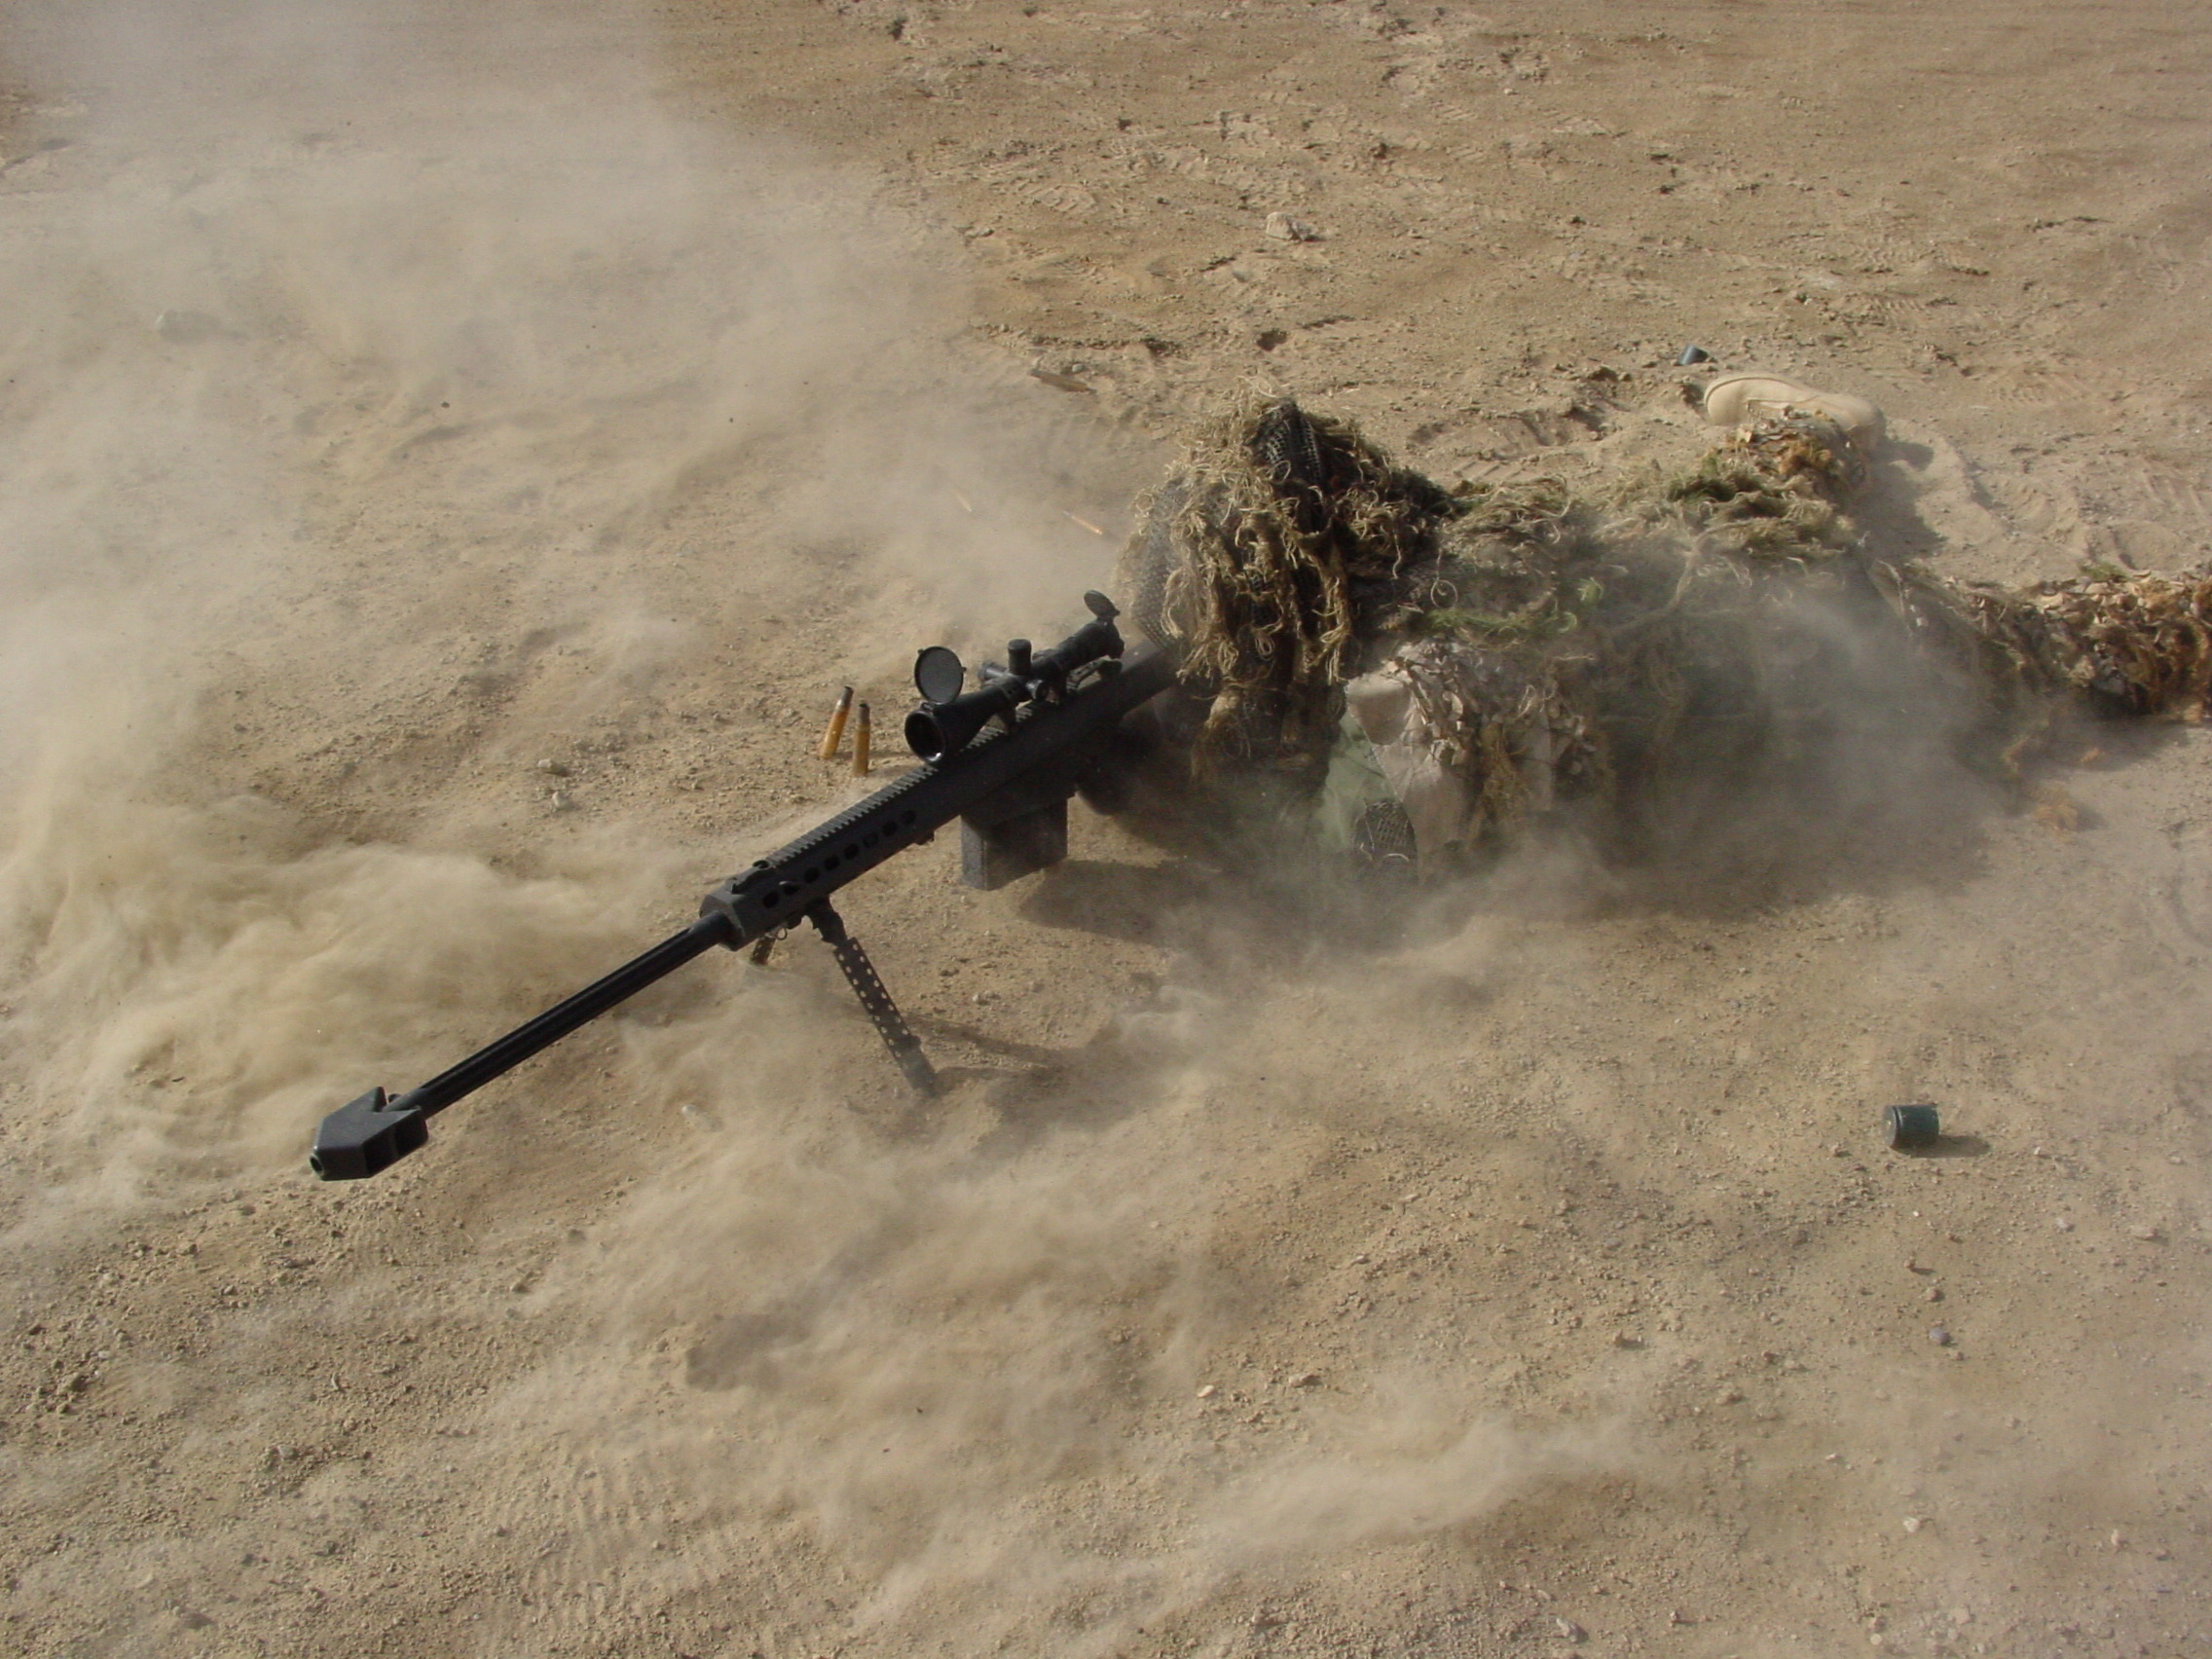 soldiers, army, military, snipers, Barrett M107, ghillie suit - desktop wallpaper